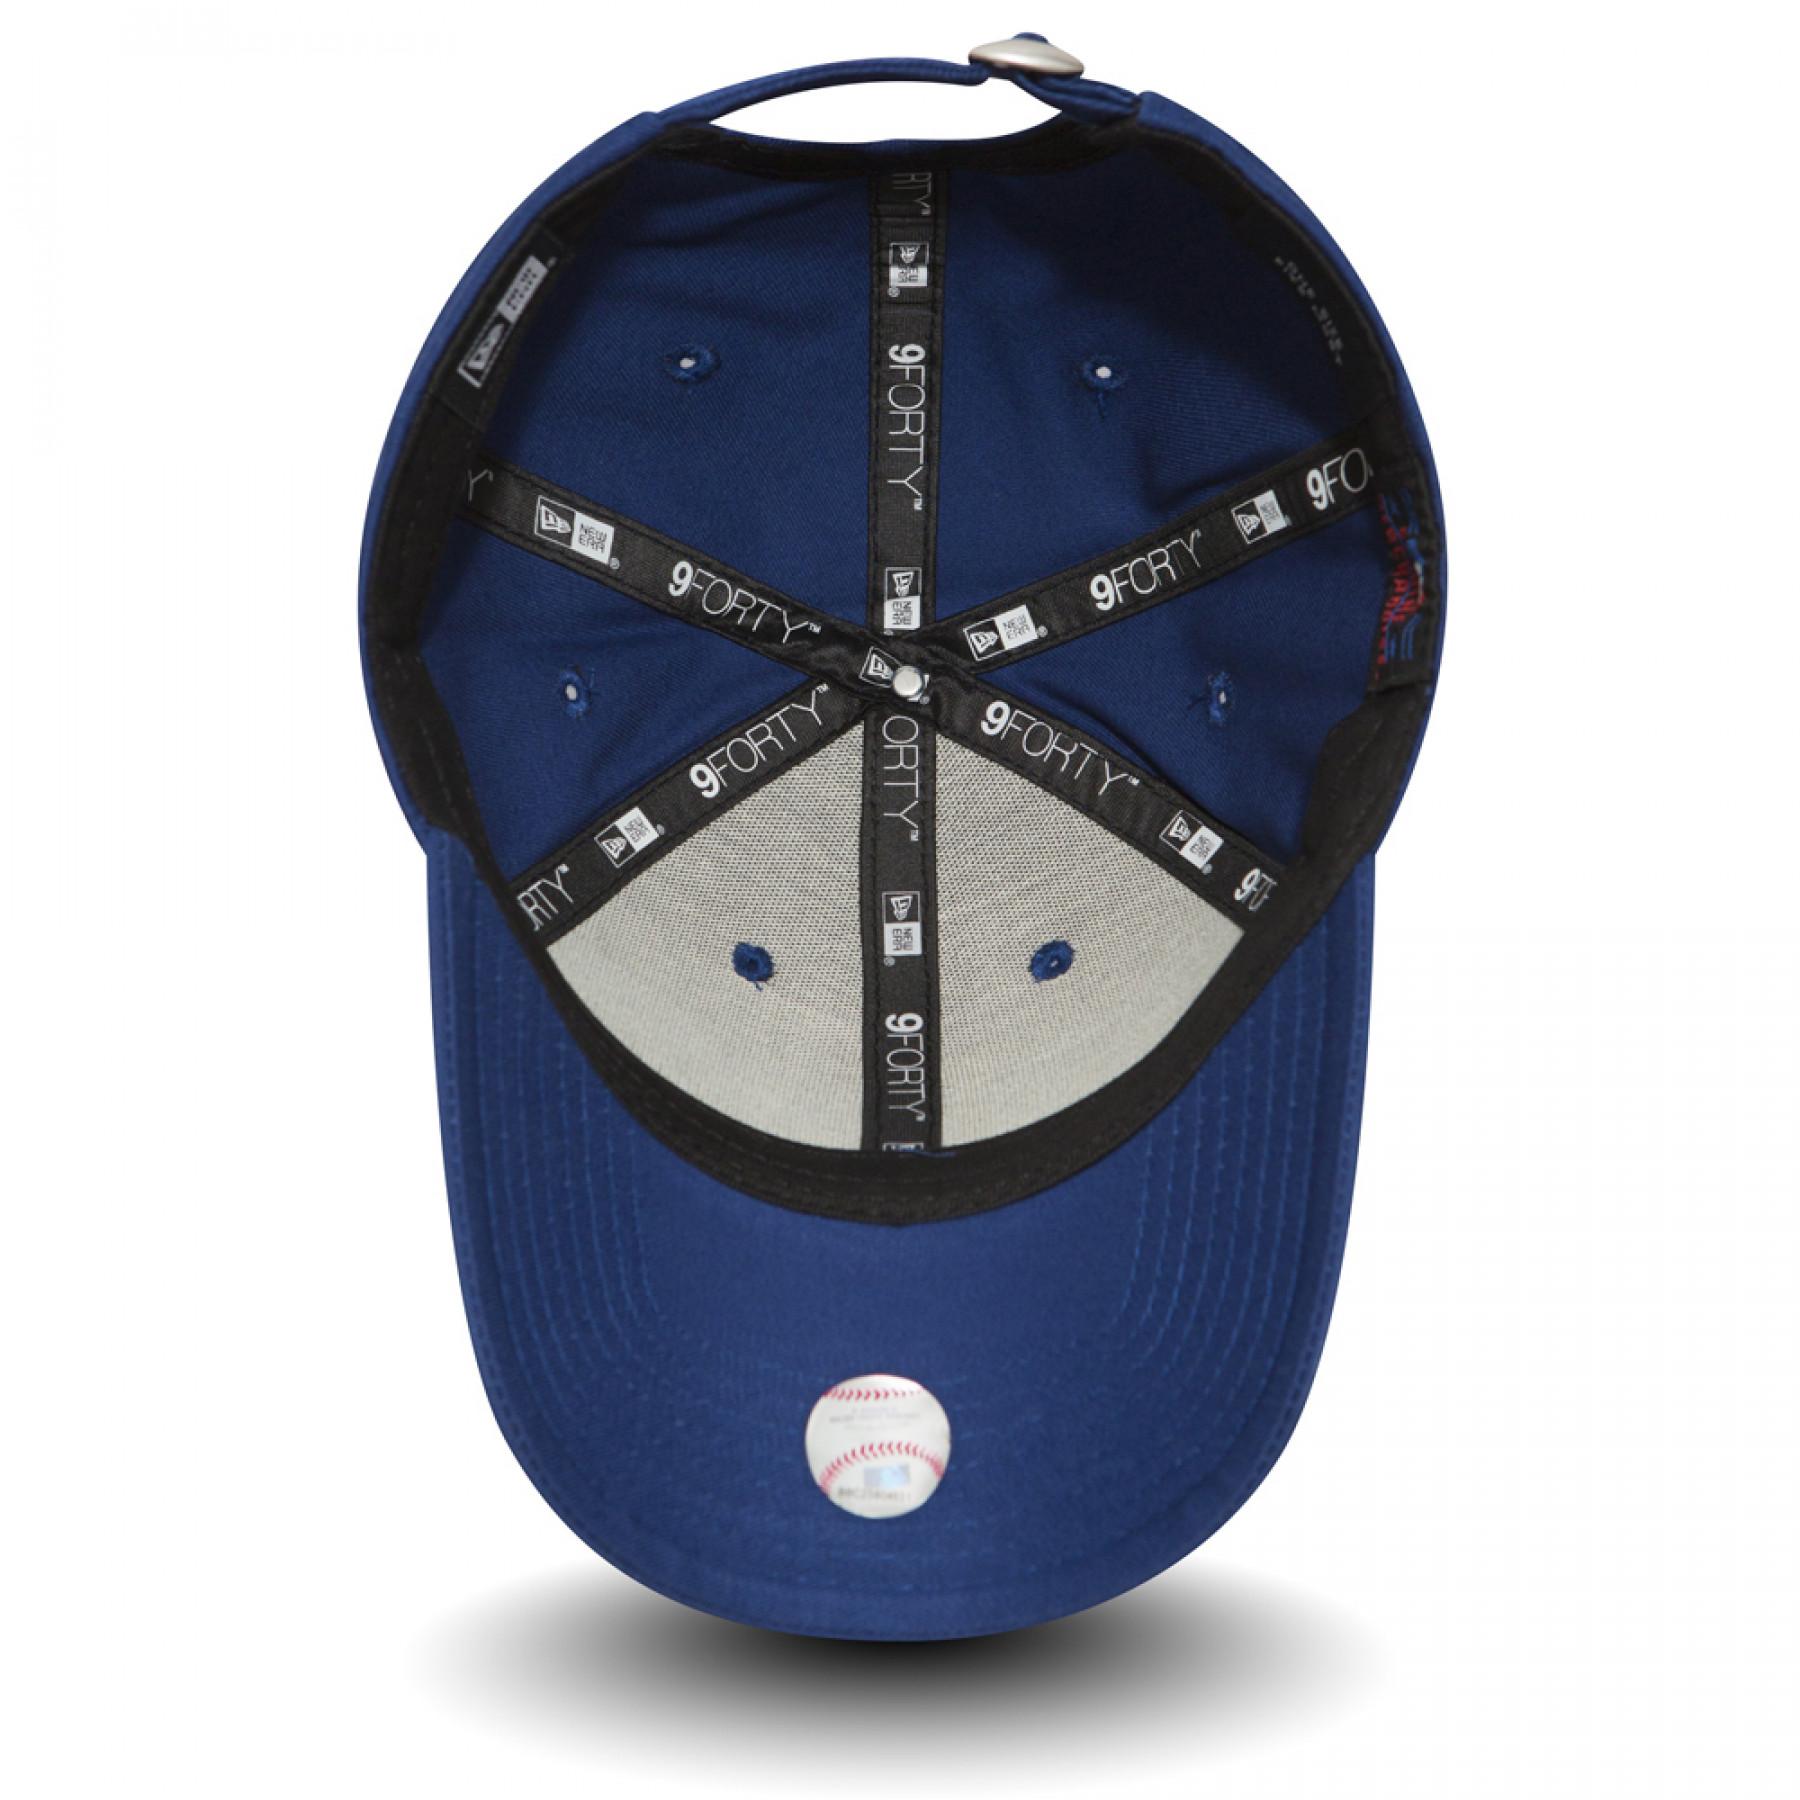 Kapsyl New Era 9forty Los Angeles Dodgers League Essential